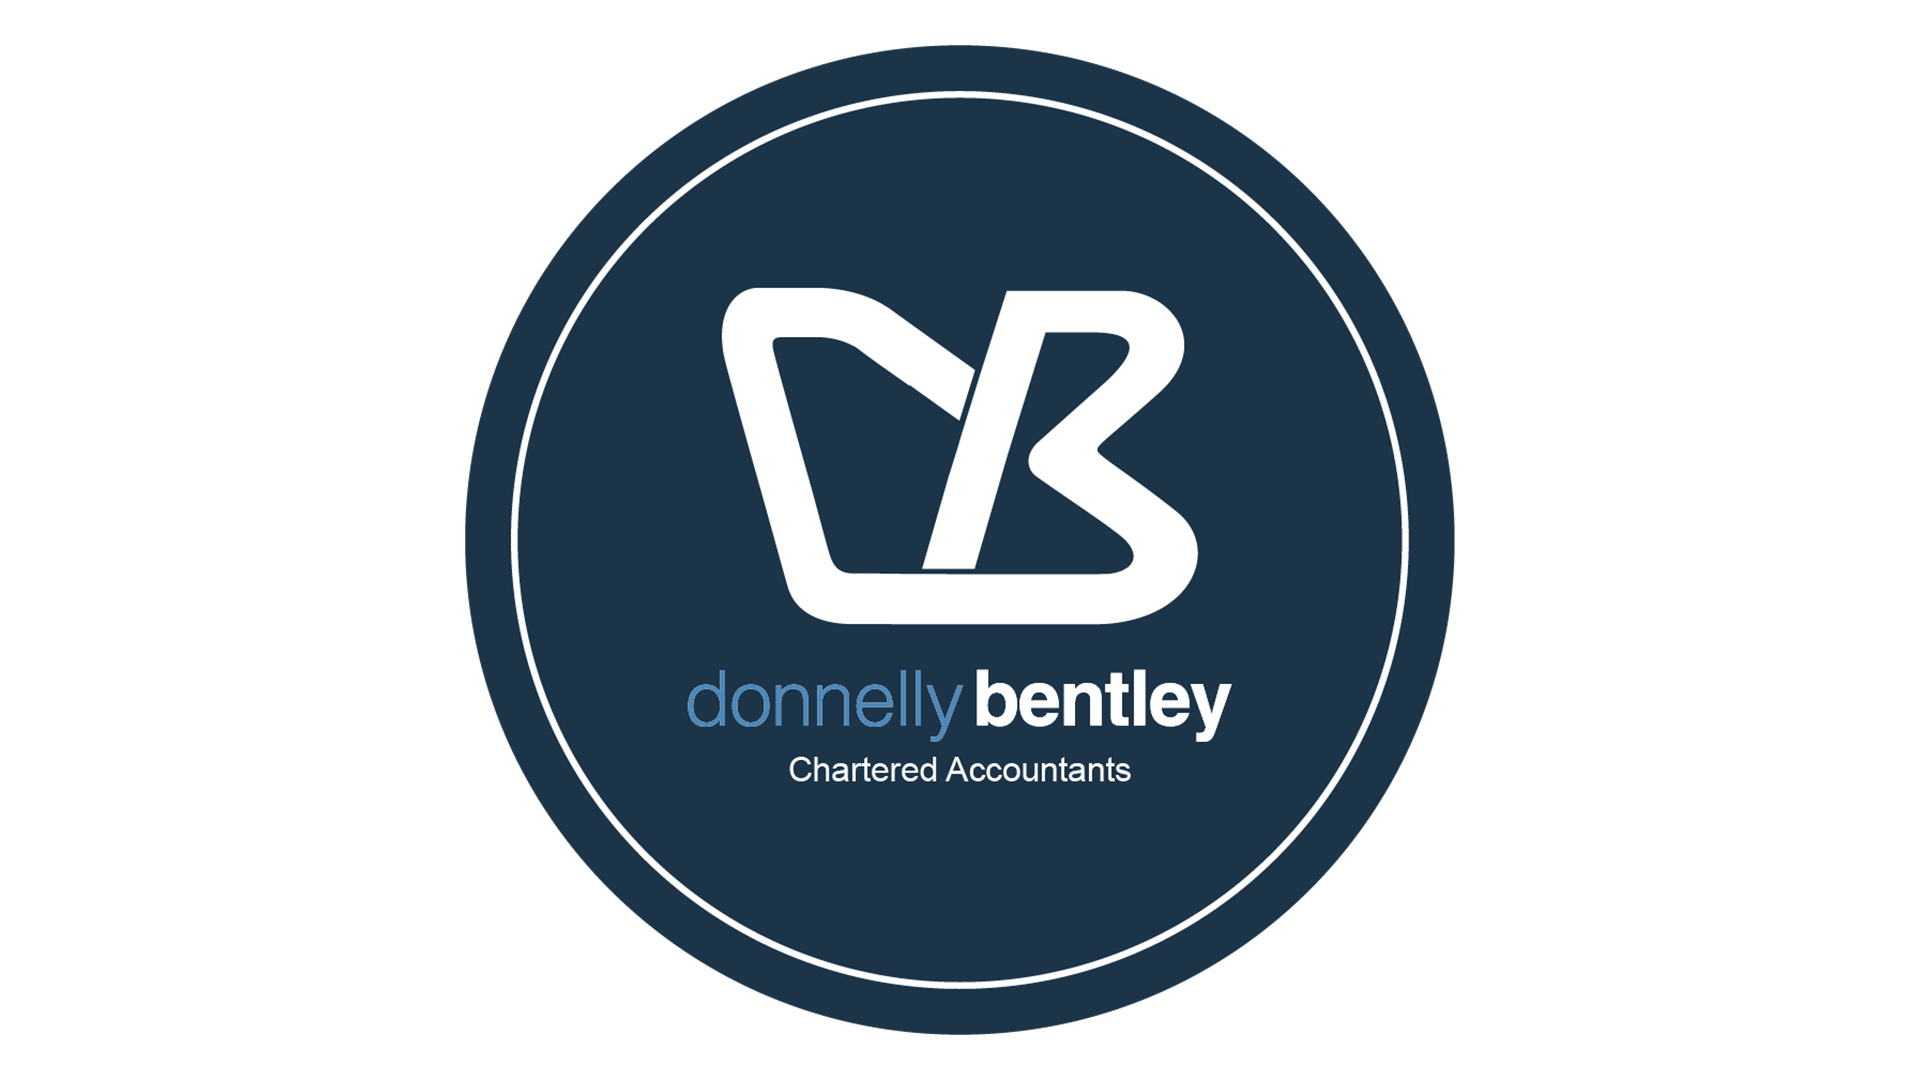 Donnelly Bentley